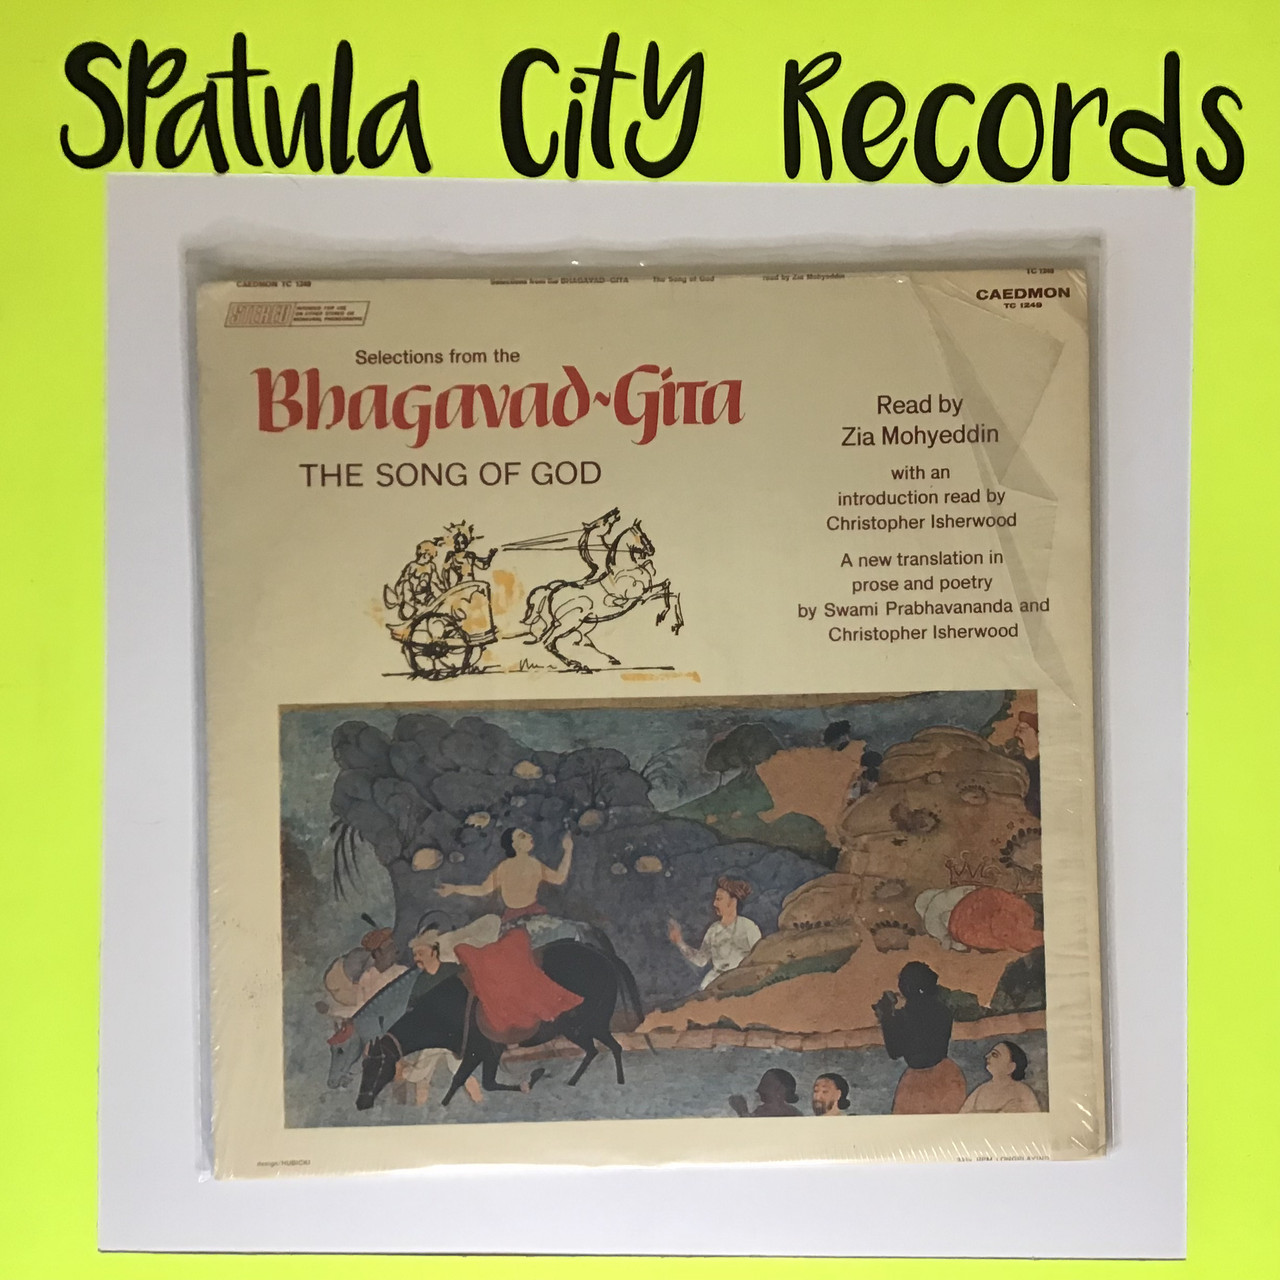 Zia Mohyeddin - Selections from the Bhagavad-Gita, The Song of God - vinyl record album LP